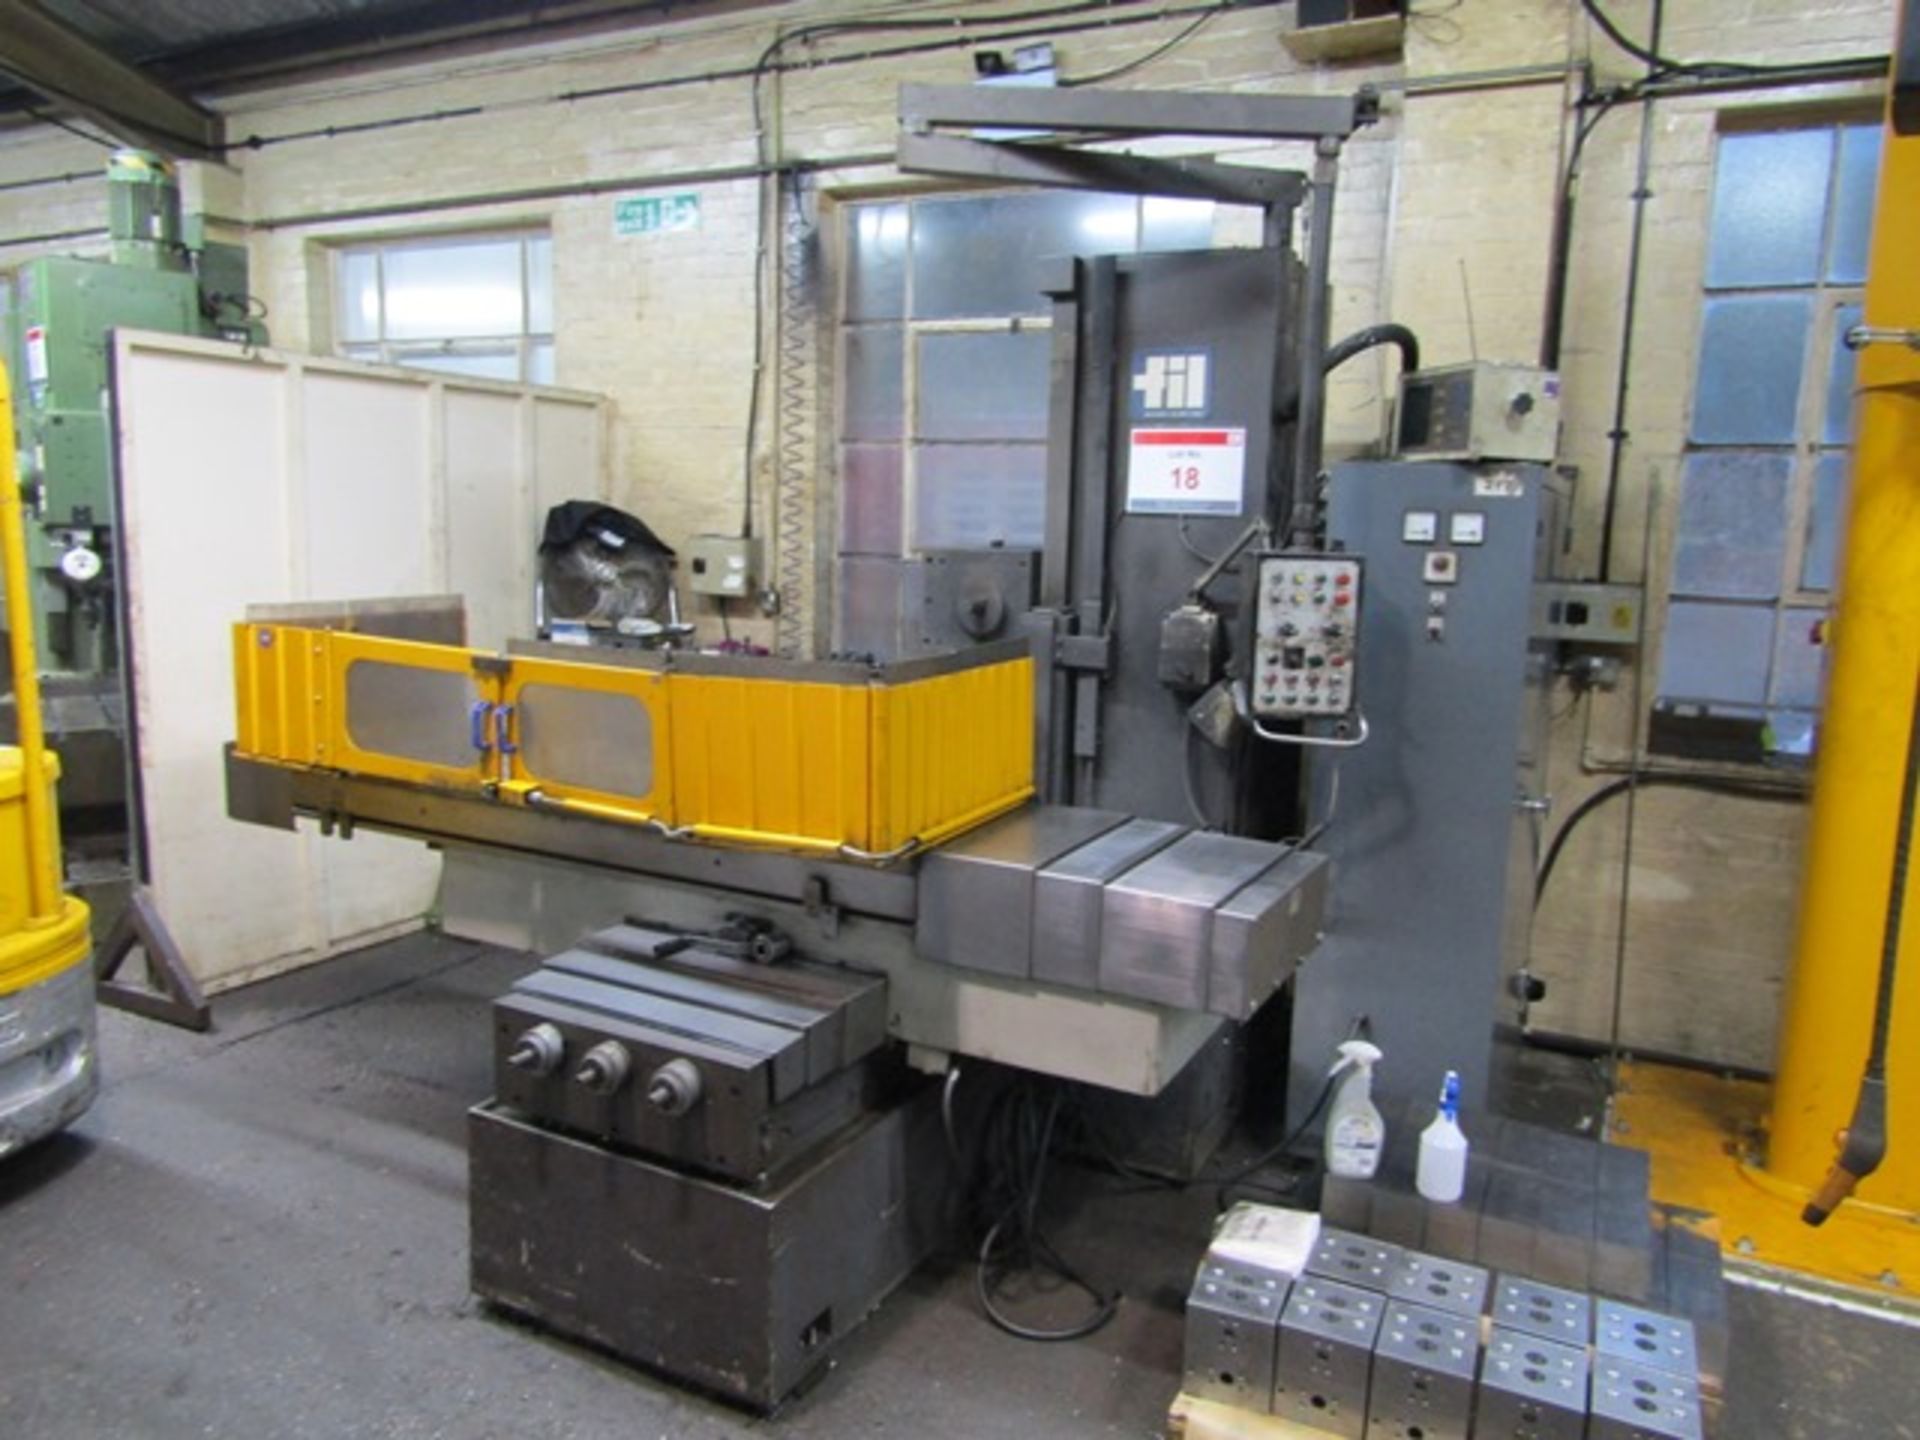 FIL FA150 bed type horizontal spindle milling machine, with power overarm vertical head drive